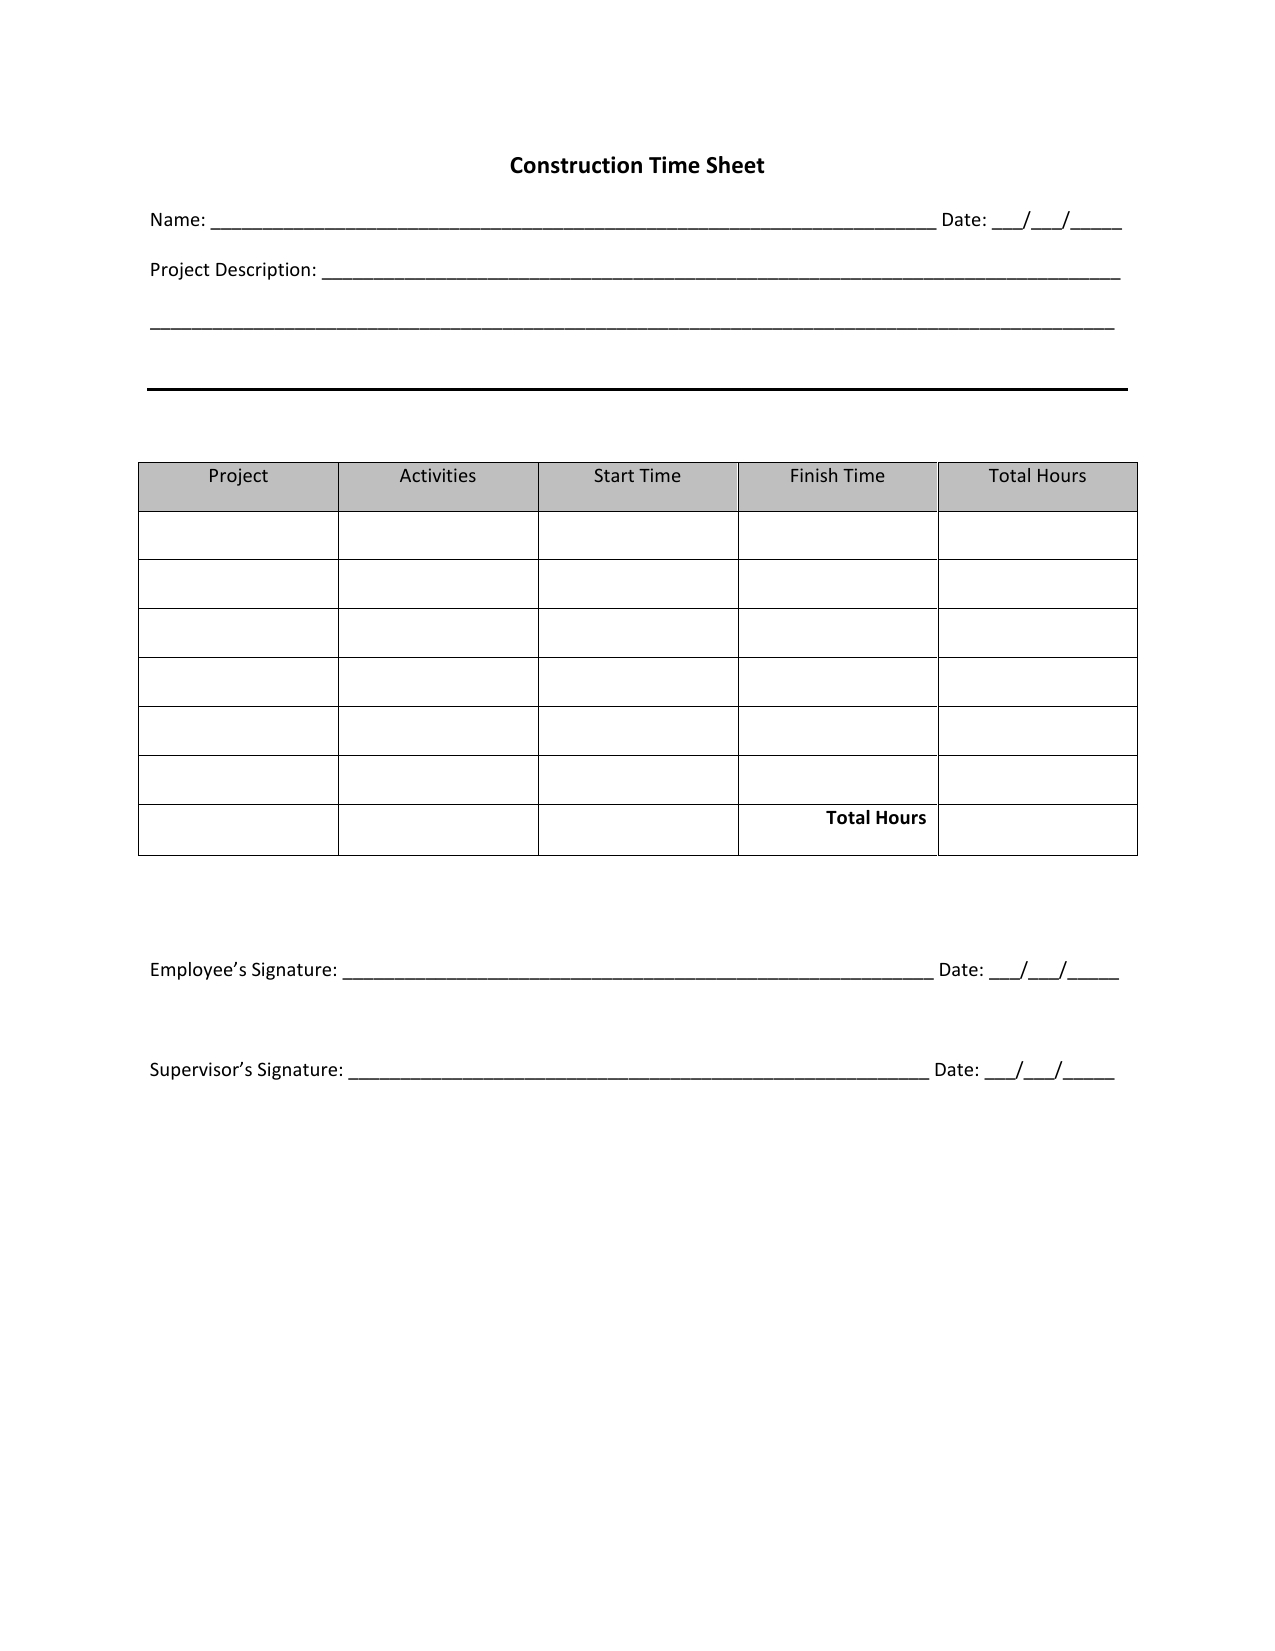 Download Construction Timesheet Template | Excel | Pdf | Rtf | Word intended for Employee Timesheet Template